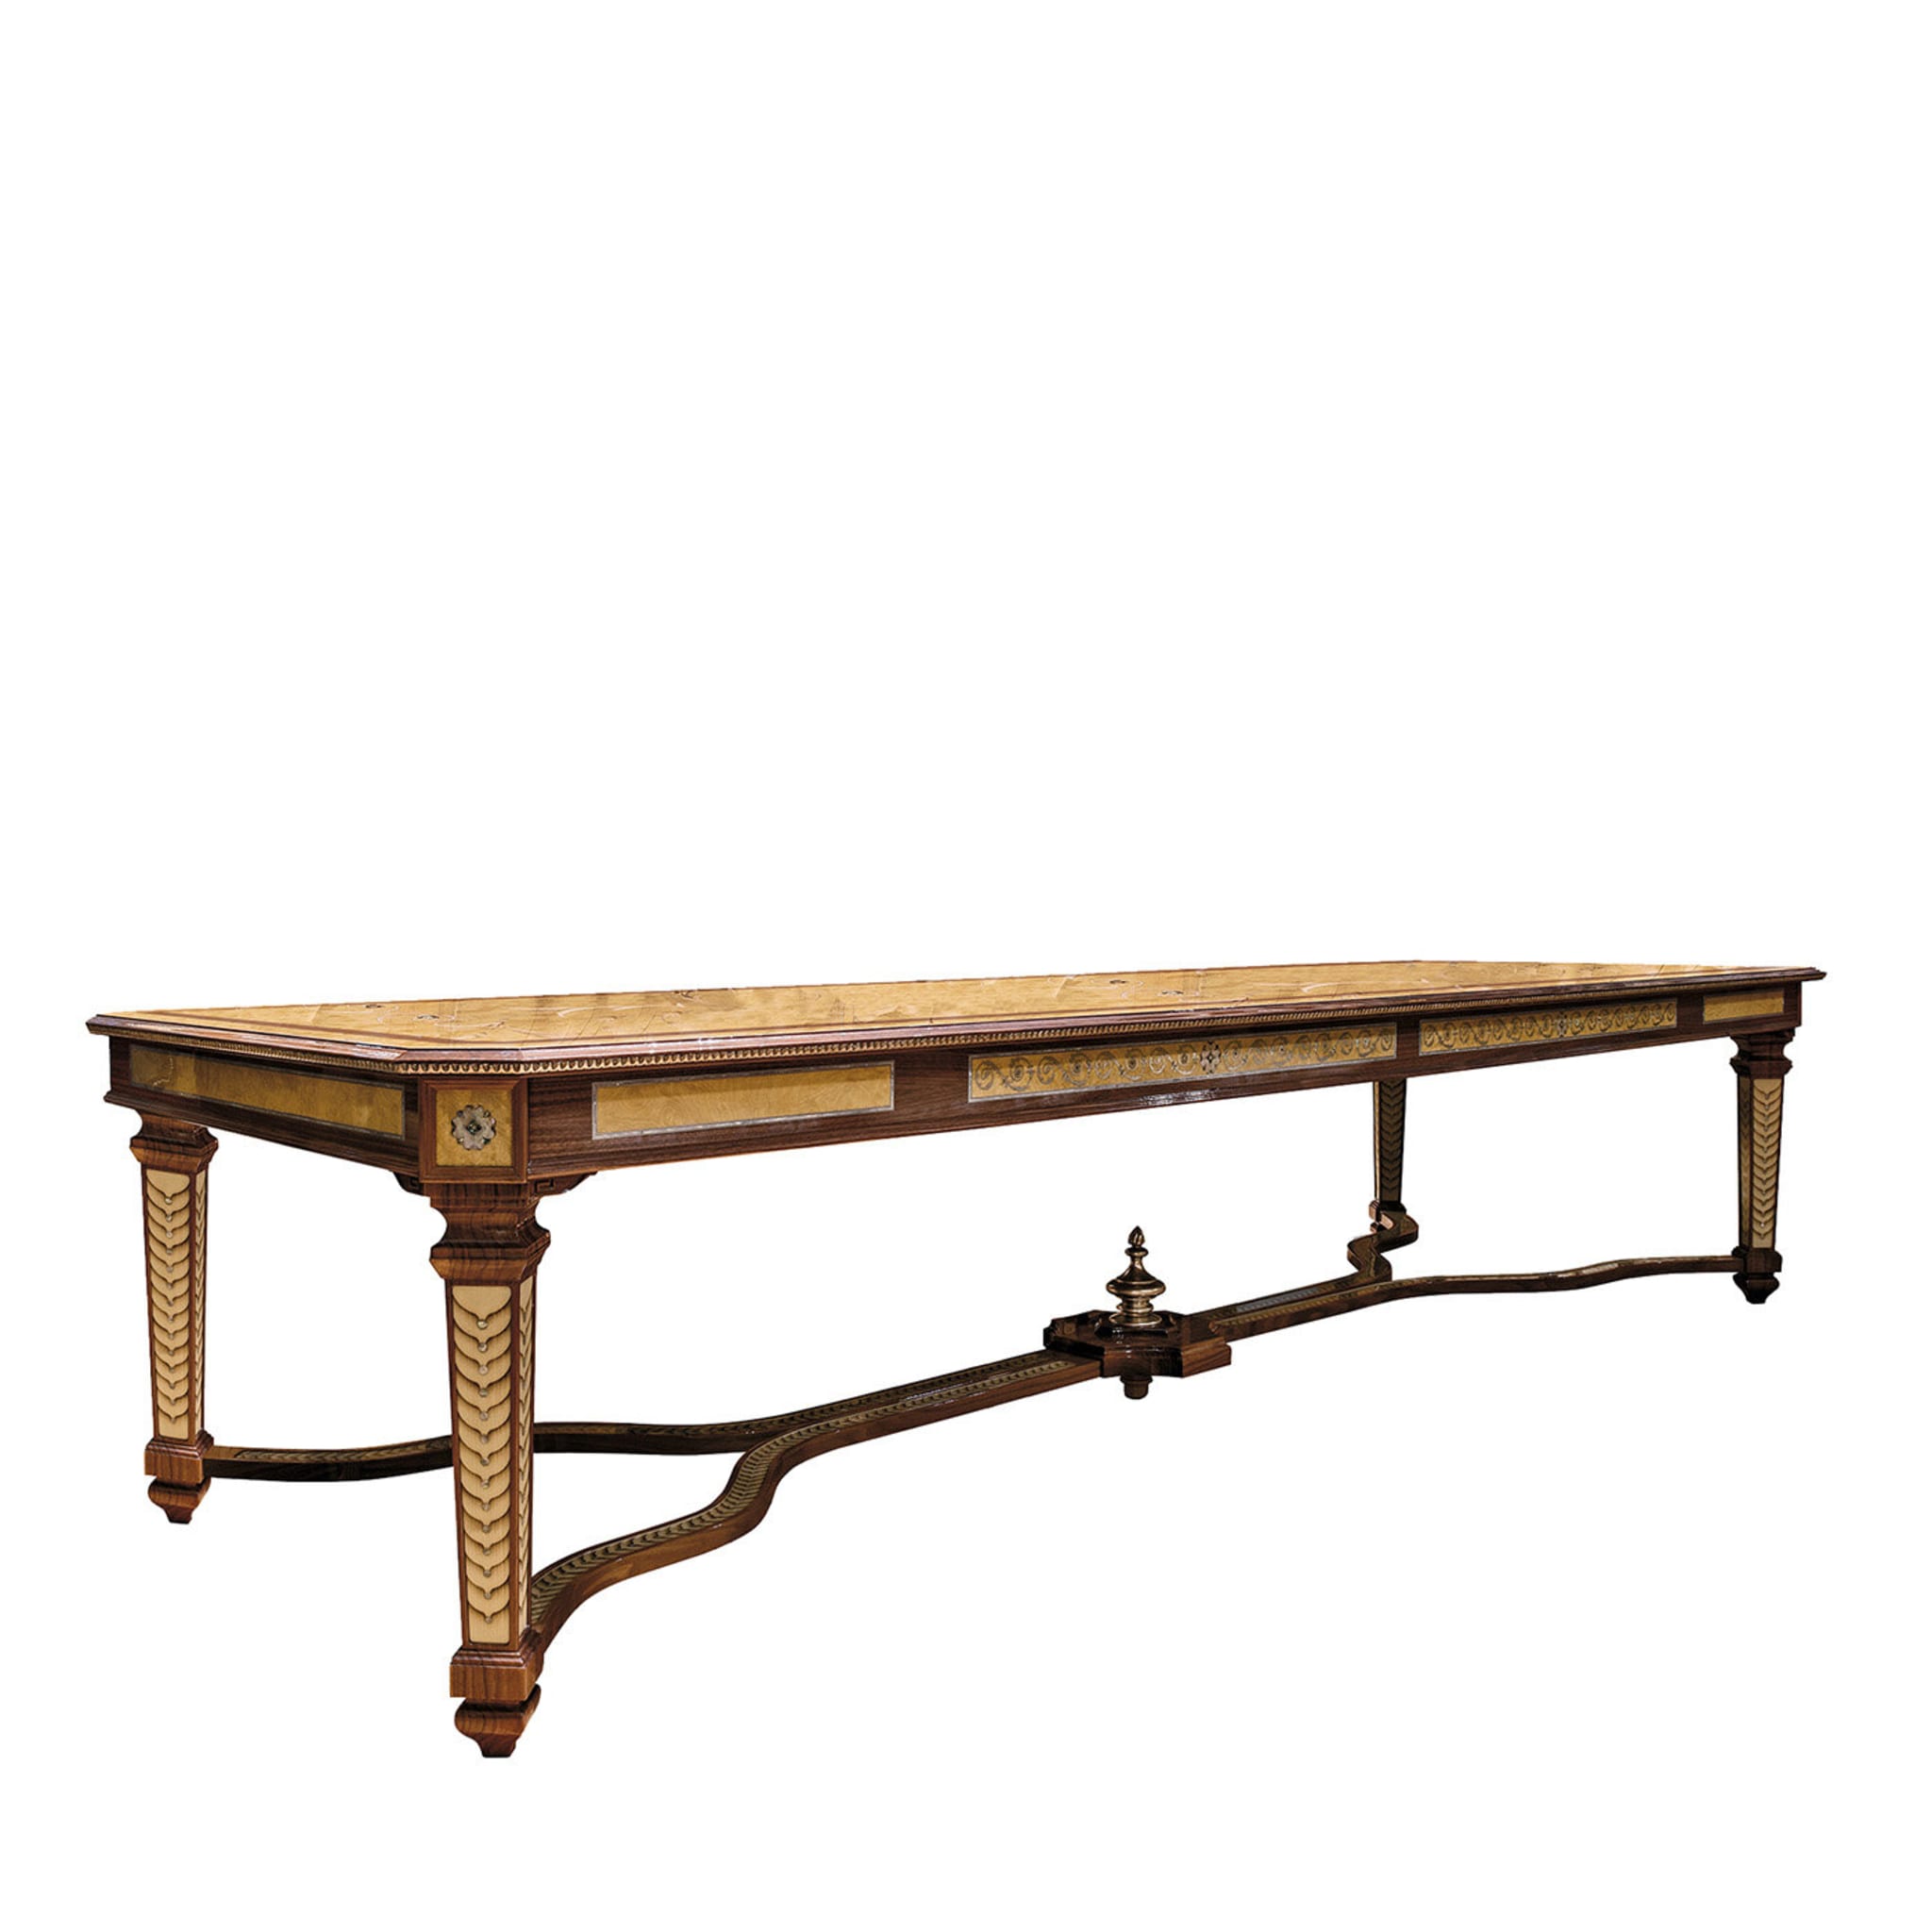 Walnut and Briar Dining Table with Gold Leaf Inlay - Main view